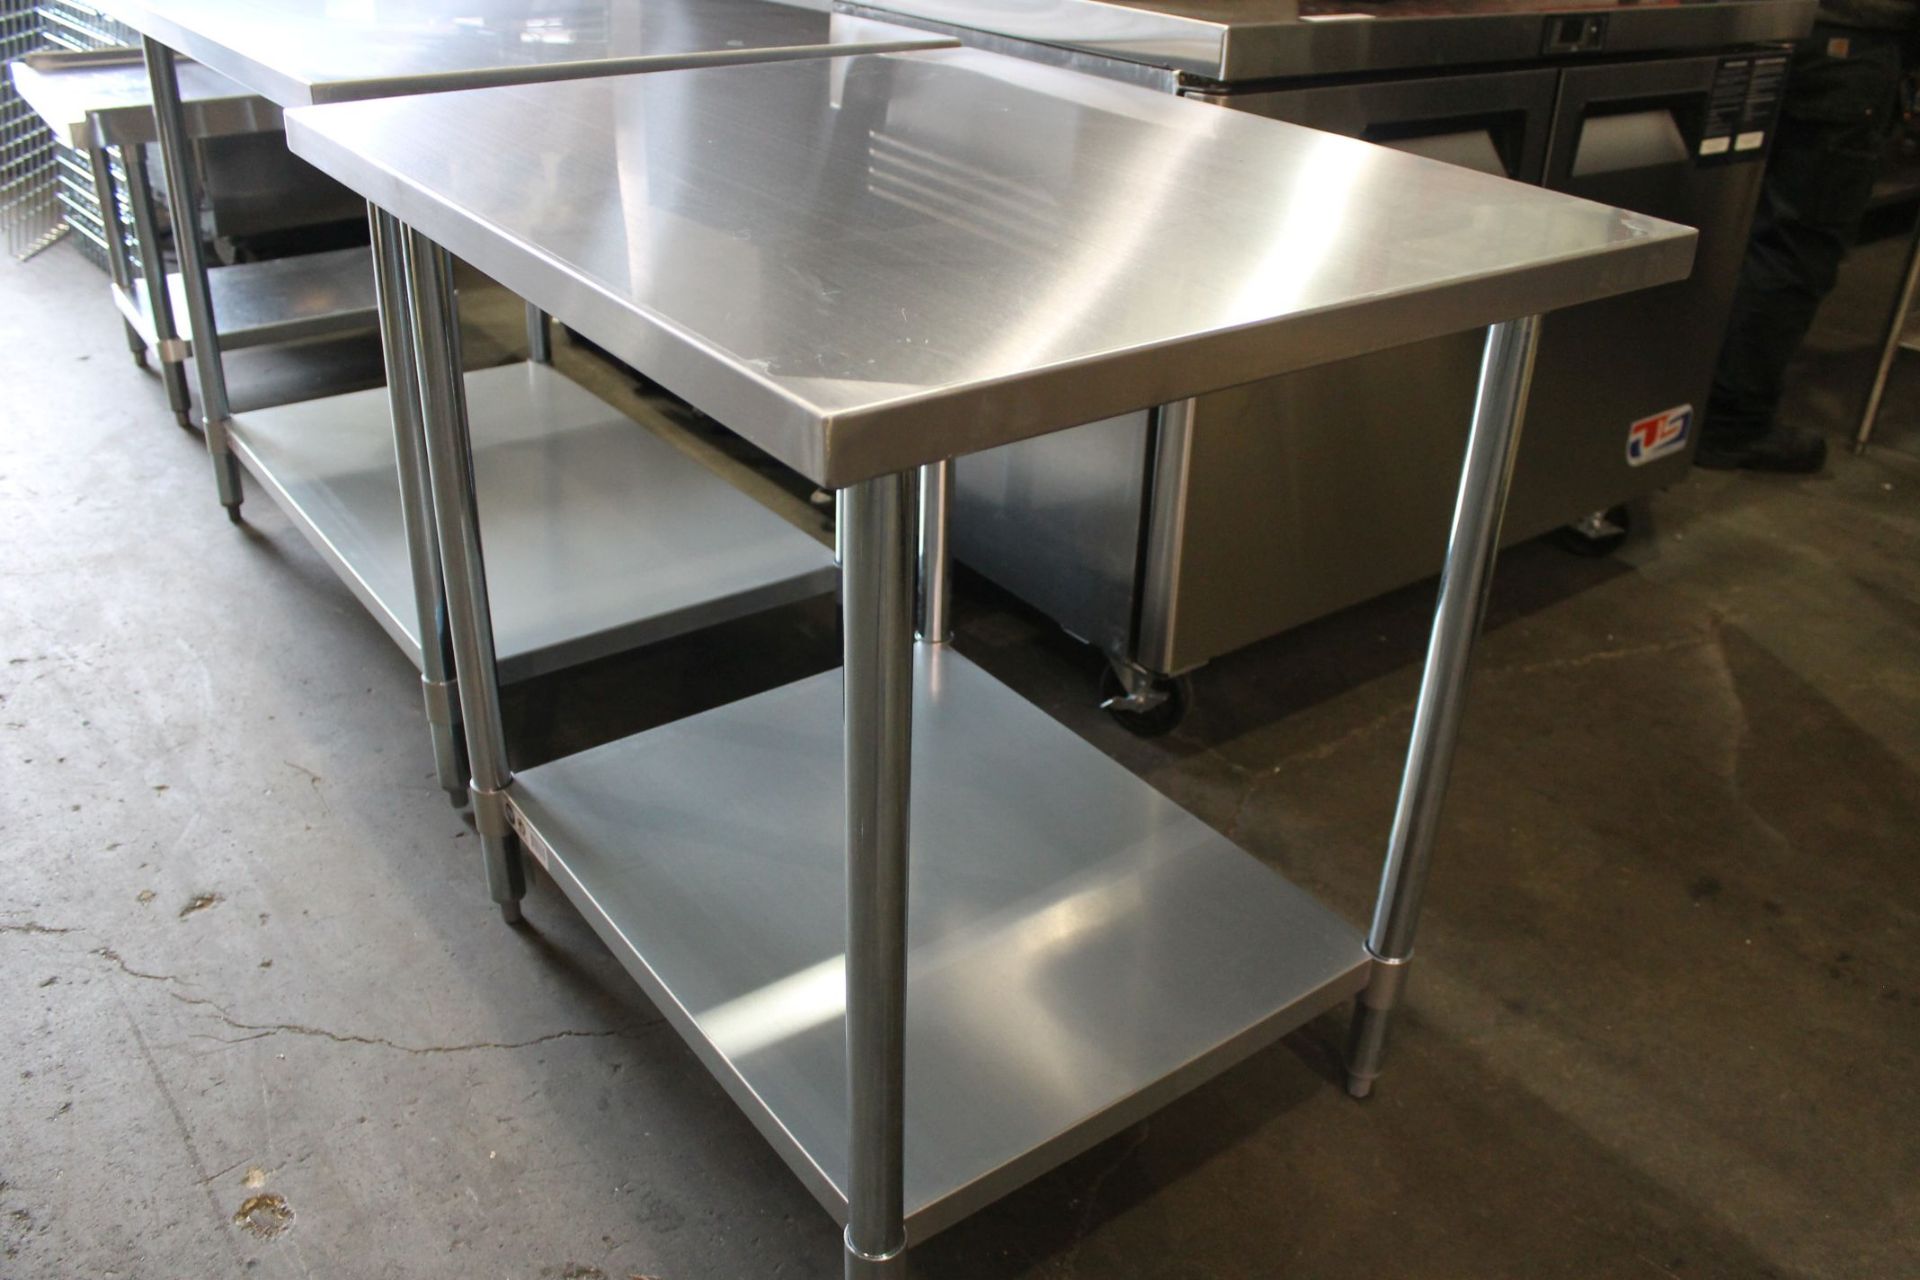 Stainless Work Table 30" x 36" Johnson-Rose 83036 - Image 2 of 2